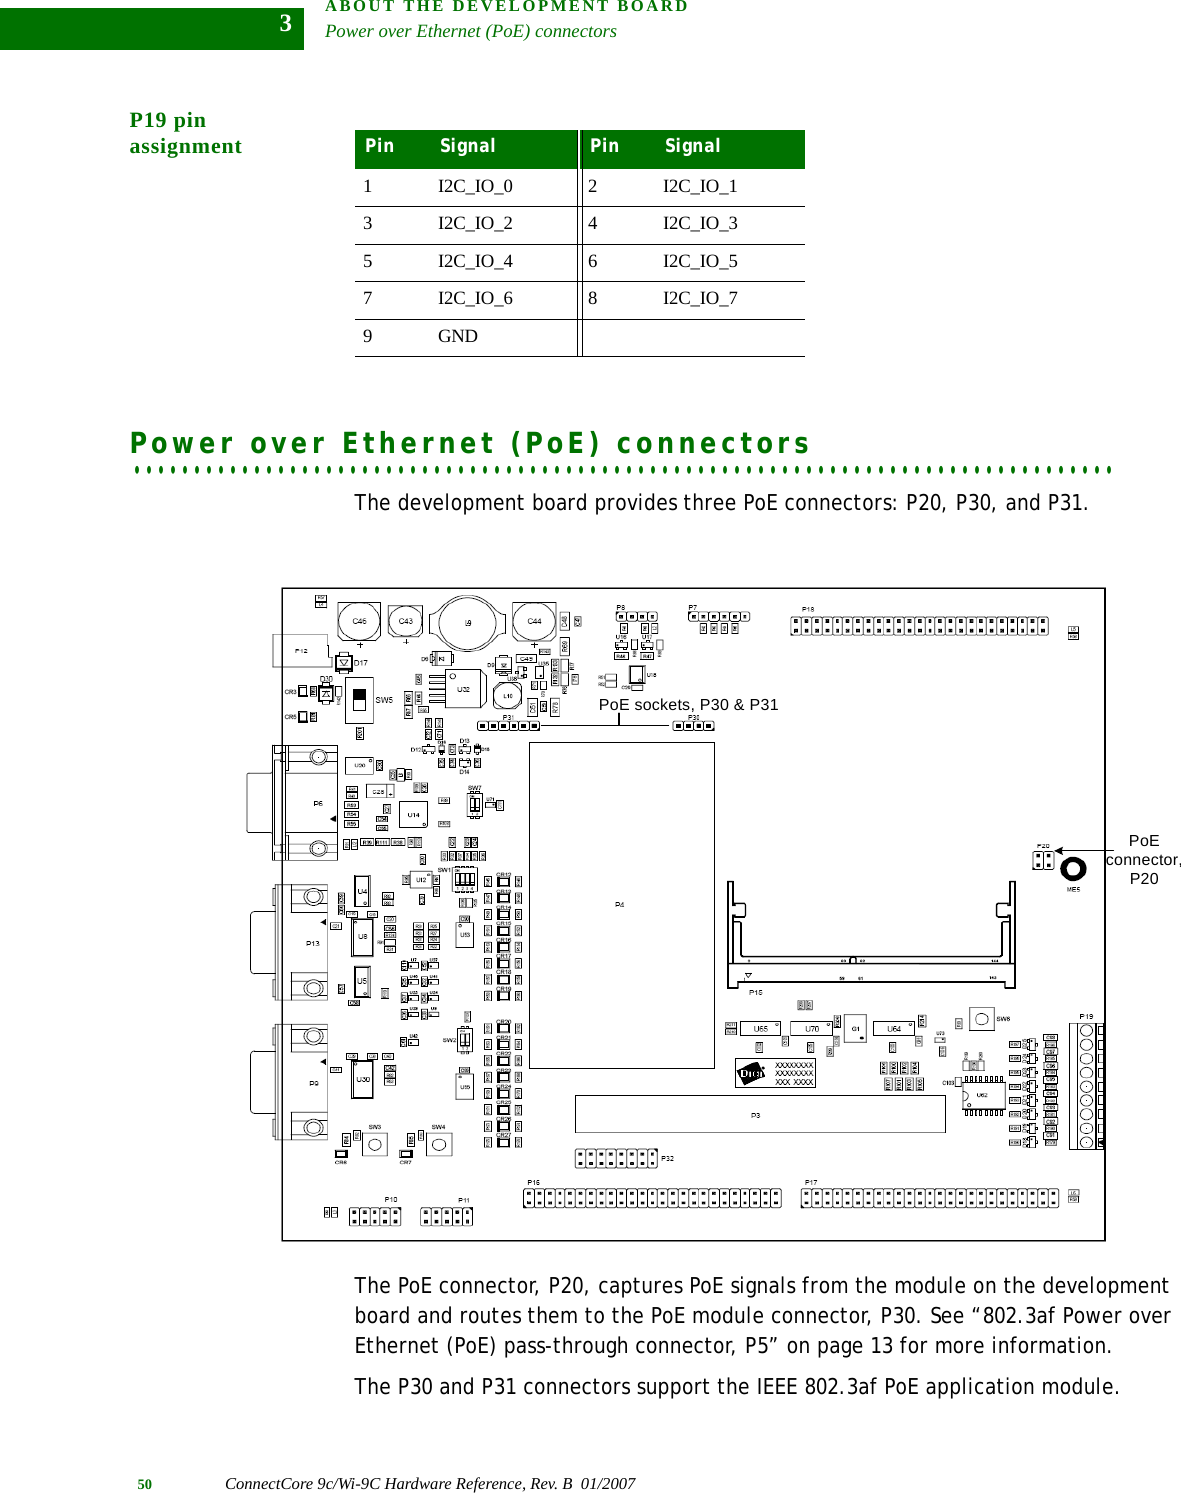 ABOUT THE DEVELOPMENT BOARDPower over Ethernet (PoE) connectors50 ConnectCore 9c/Wi-9C Hardware Reference, Rev. B  01/20073P19 pin assignment. . . . . . . . . . . . . . . . . . . . . . . . . . . . . . . . . . . . . . . . . . . . . . . . . . . . . . . . . . . . . . . . . . . . . . . . . . . . . . . . . .Power over Ethernet (PoE) connectorsThe development board provides three PoE connectors: P20, P30, and P31.The PoE connector, P20, captures PoE signals from the module on the development board and routes them to the PoE module connector, P30. See “802.3af Power over Ethernet (PoE) pass-through connector, P5” on page 13 for more information.The P30 and P31 connectors support the IEEE 802.3af PoE application module. Pin Signal Pin Signal1 I2C_IO_0 2 I2C_IO_13 I2C_IO_2 4 I2C_IO_35 I2C_IO_4 6 I2C_IO_57 I2C_IO_6 8 I2C_IO_79 GNDPoE connector, P20PoE sockets, P30 &amp; P31